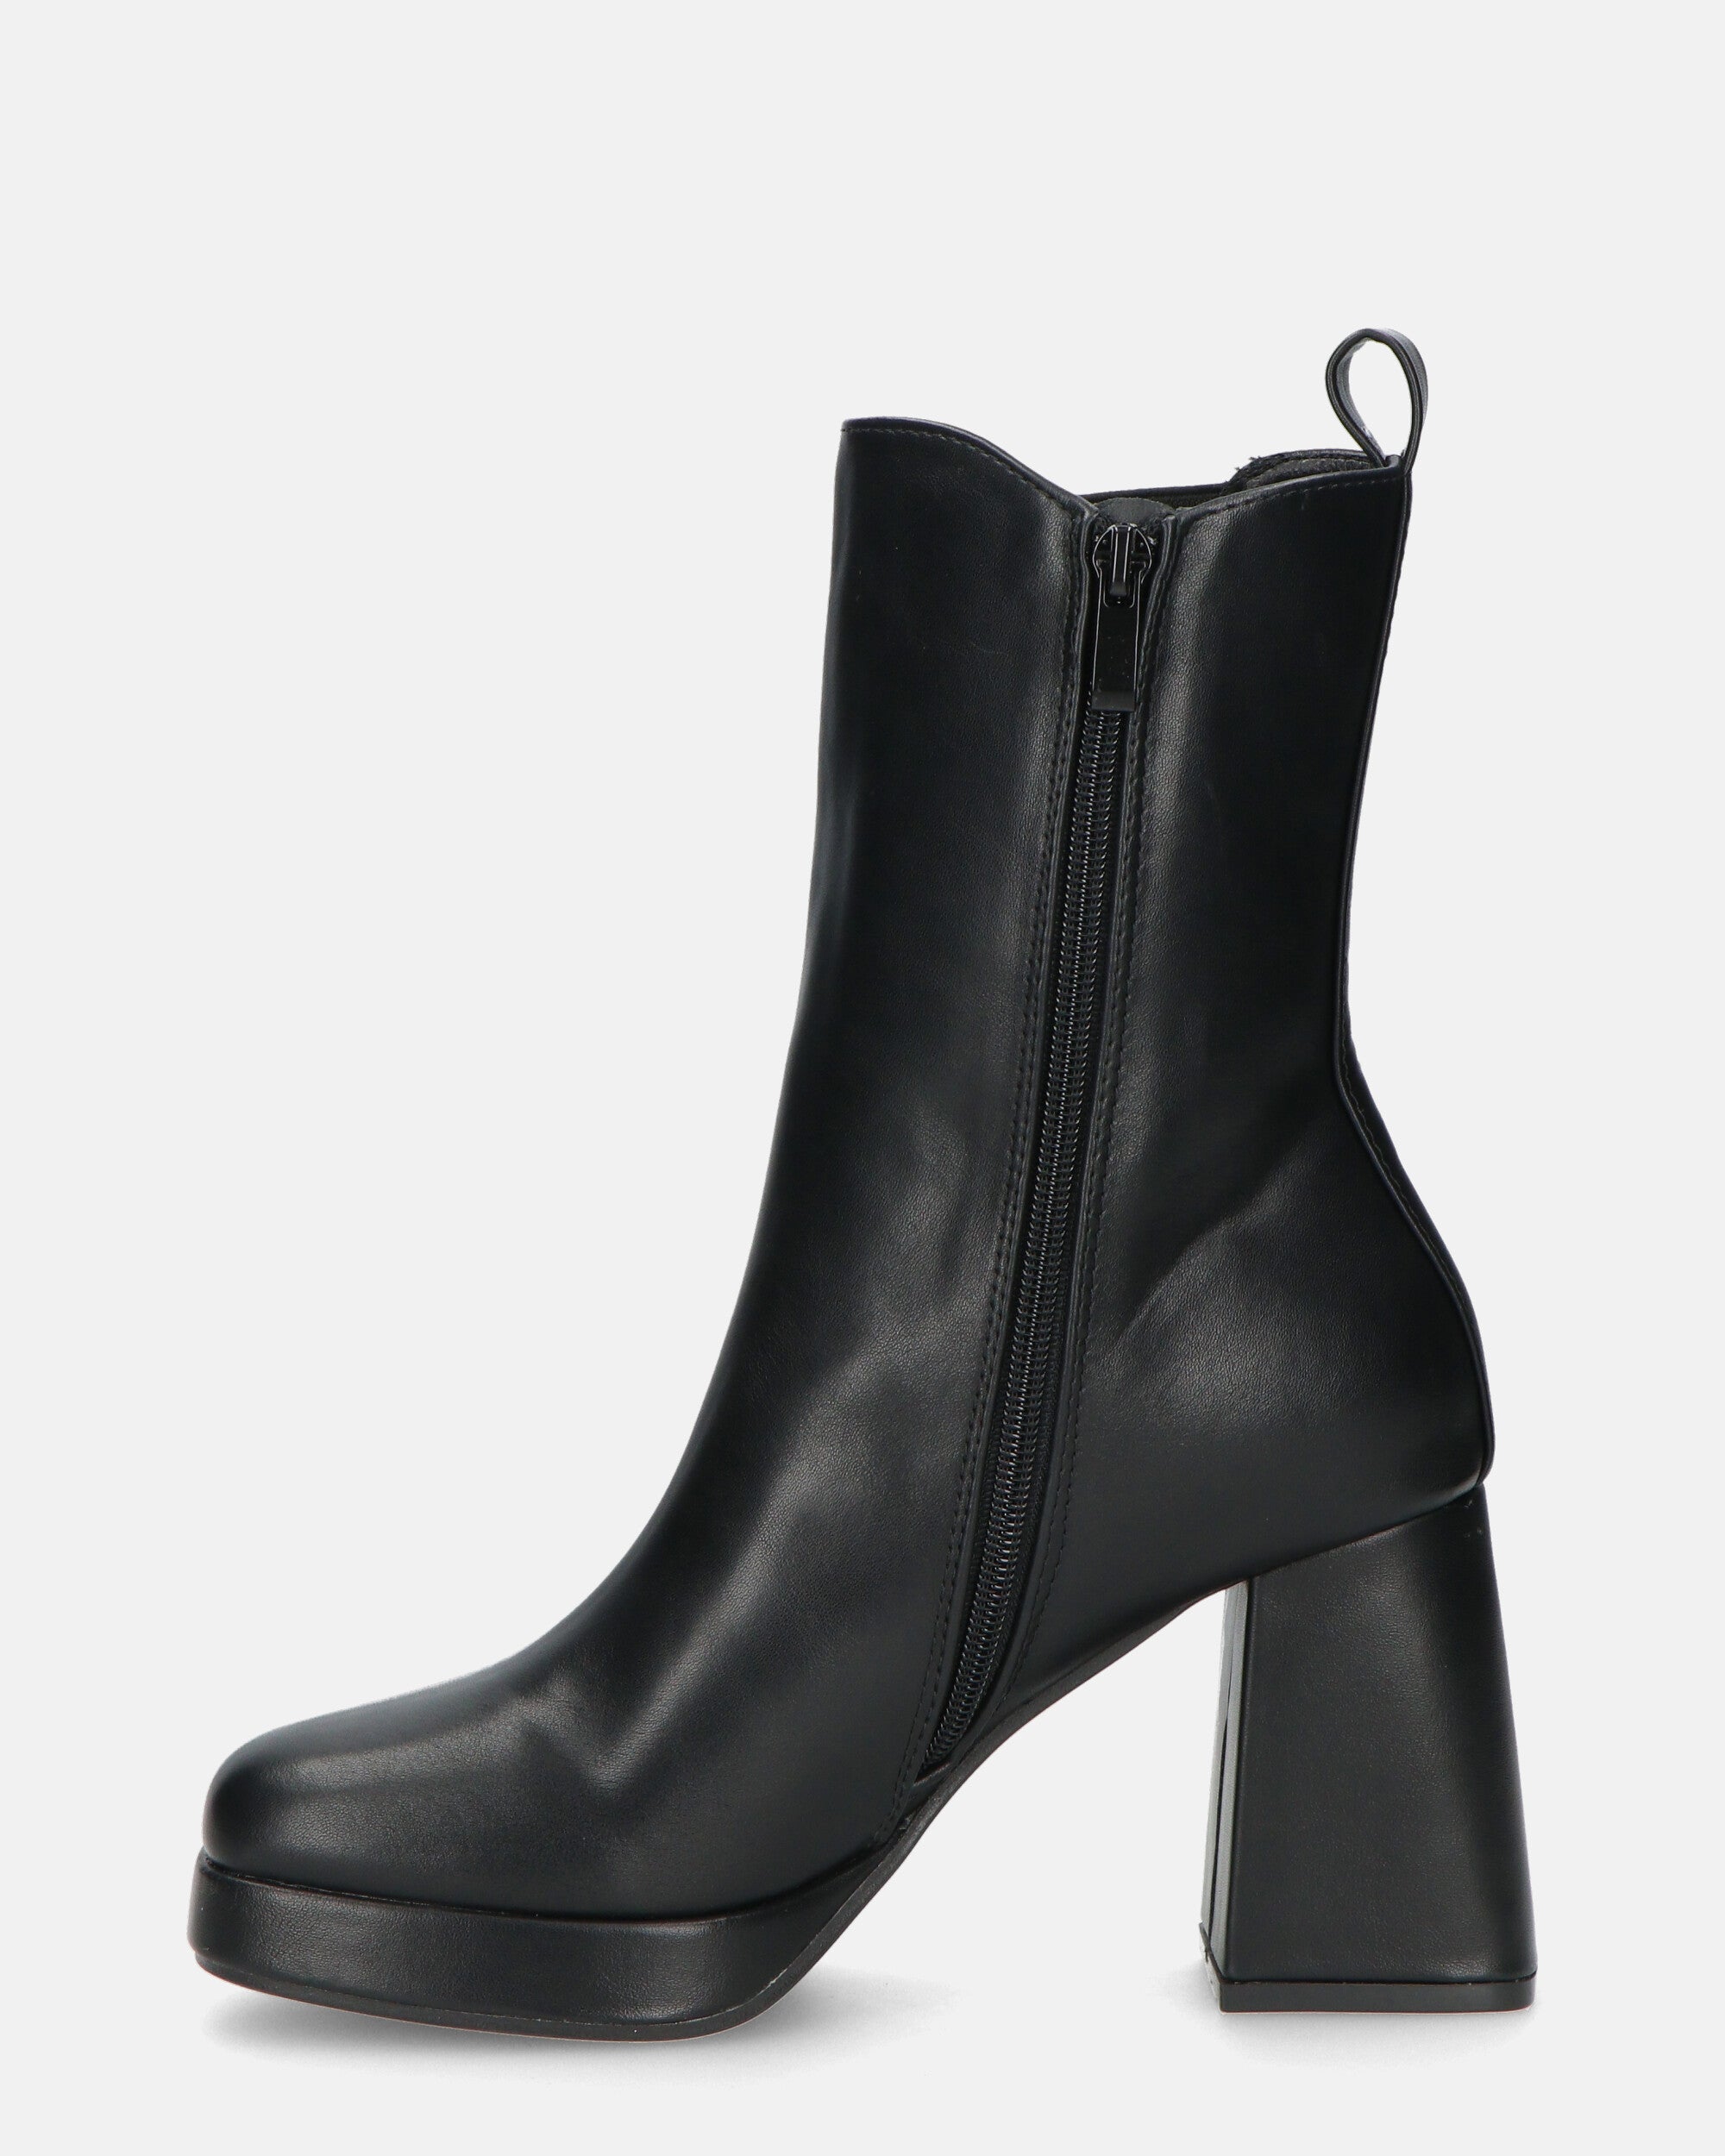 YUKI - boots with square heel and side zip